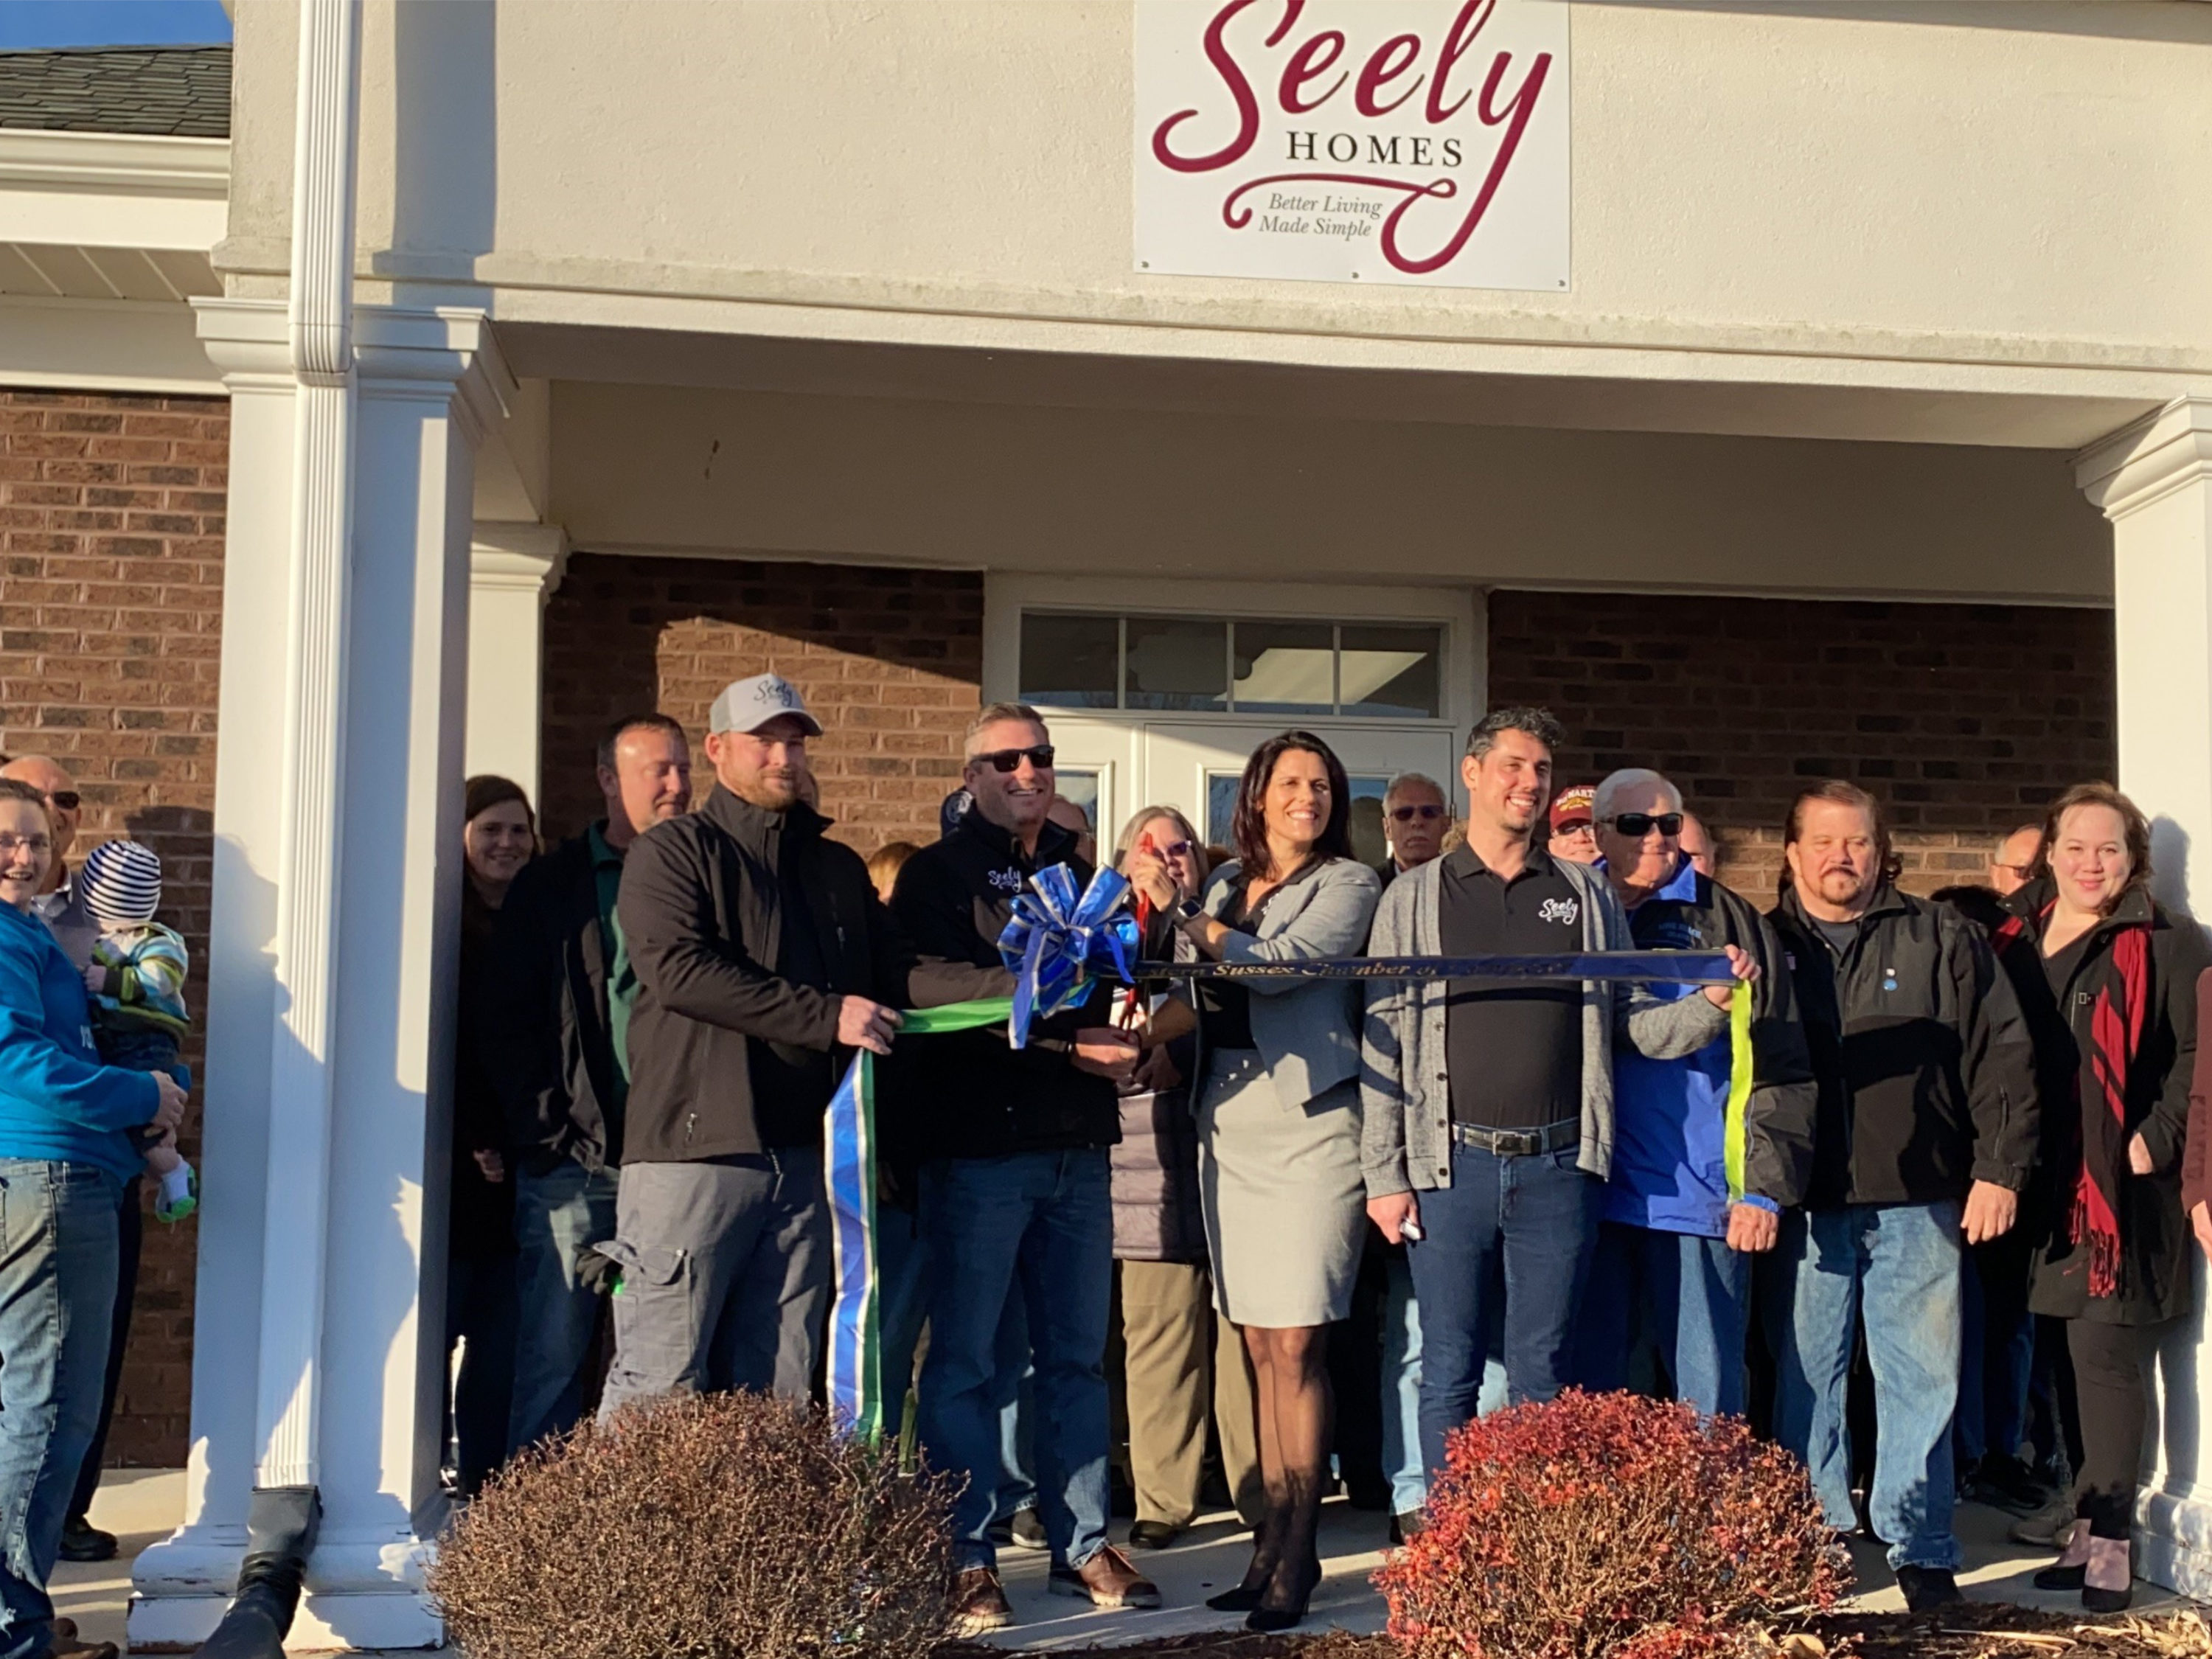 Seely Homes, Bridgeville Delaware Office Grand Opening Ribbon Cutting